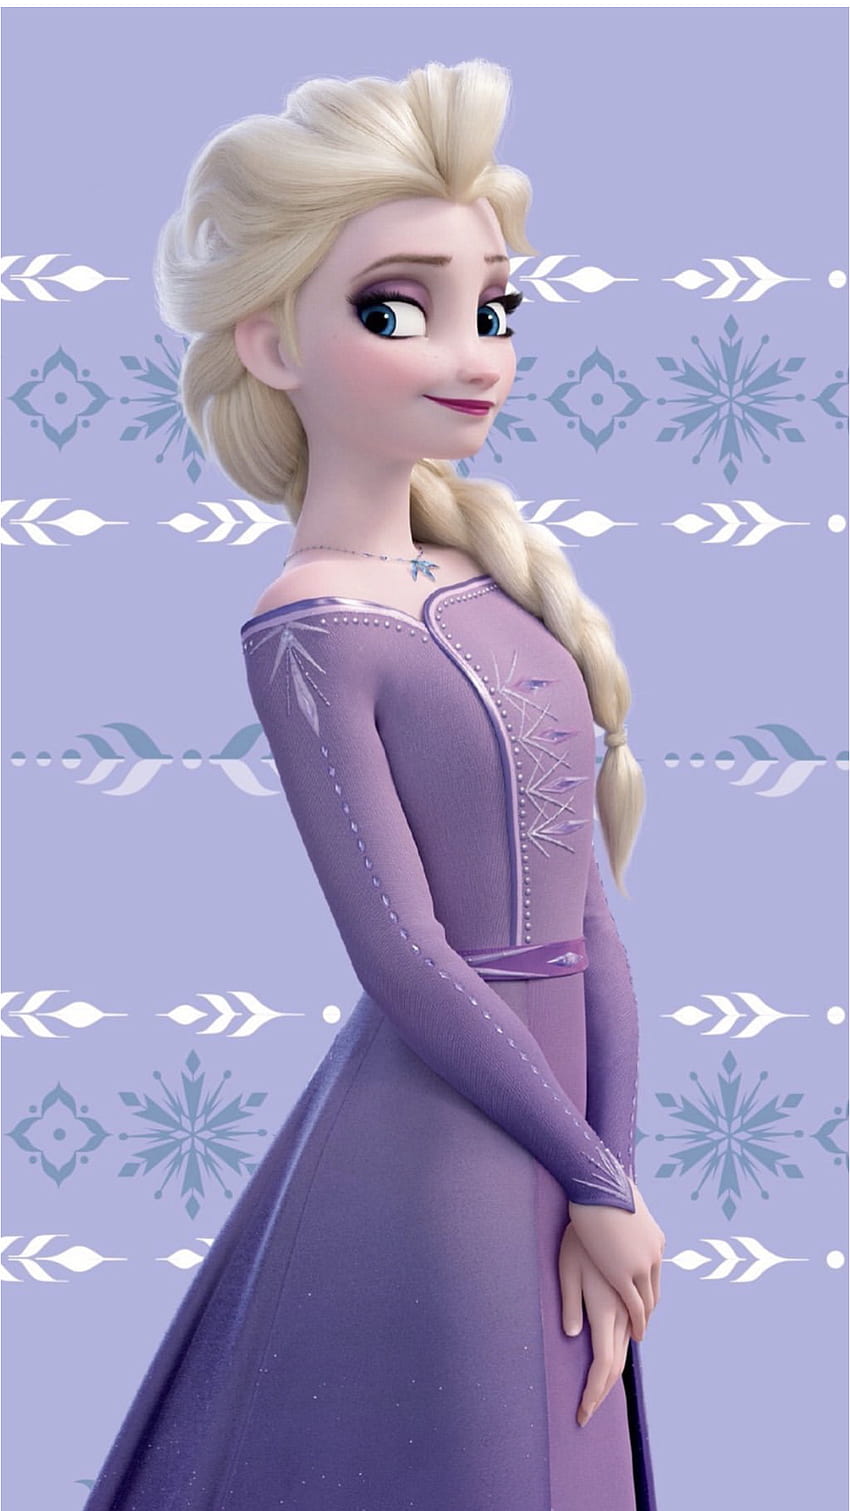 Elsa in her new and Beautiful Lilac Purple dress from Frozen 2 in 2020. ディズニープリンセス フローズン, ディズニープリンセス エルサ, ディズニープリンセス HD電話の壁紙